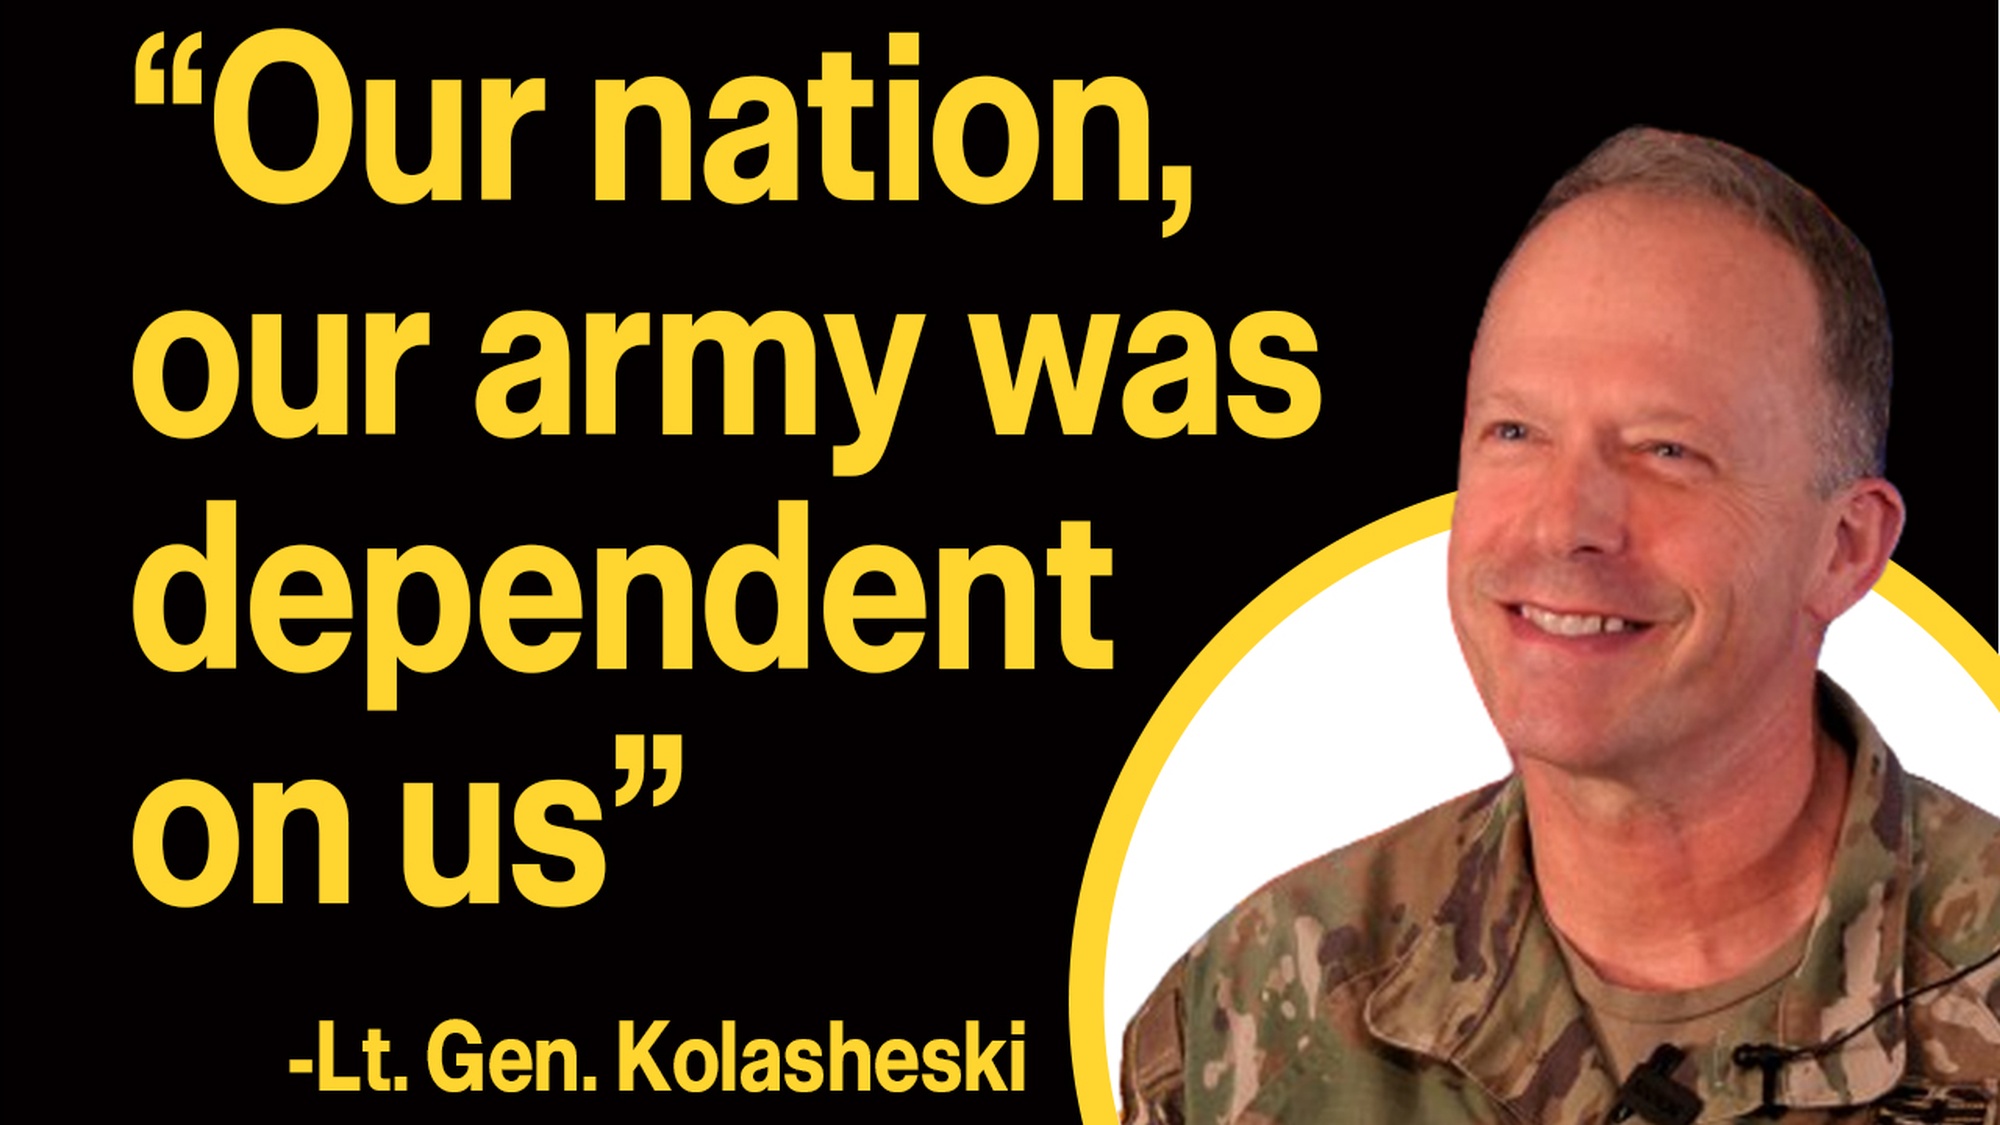 Lt. Gen. John S. Kolasheski, former commanding general of V Corps, goes over his career in the army as he prepares to retire after nearly 35 years of service.